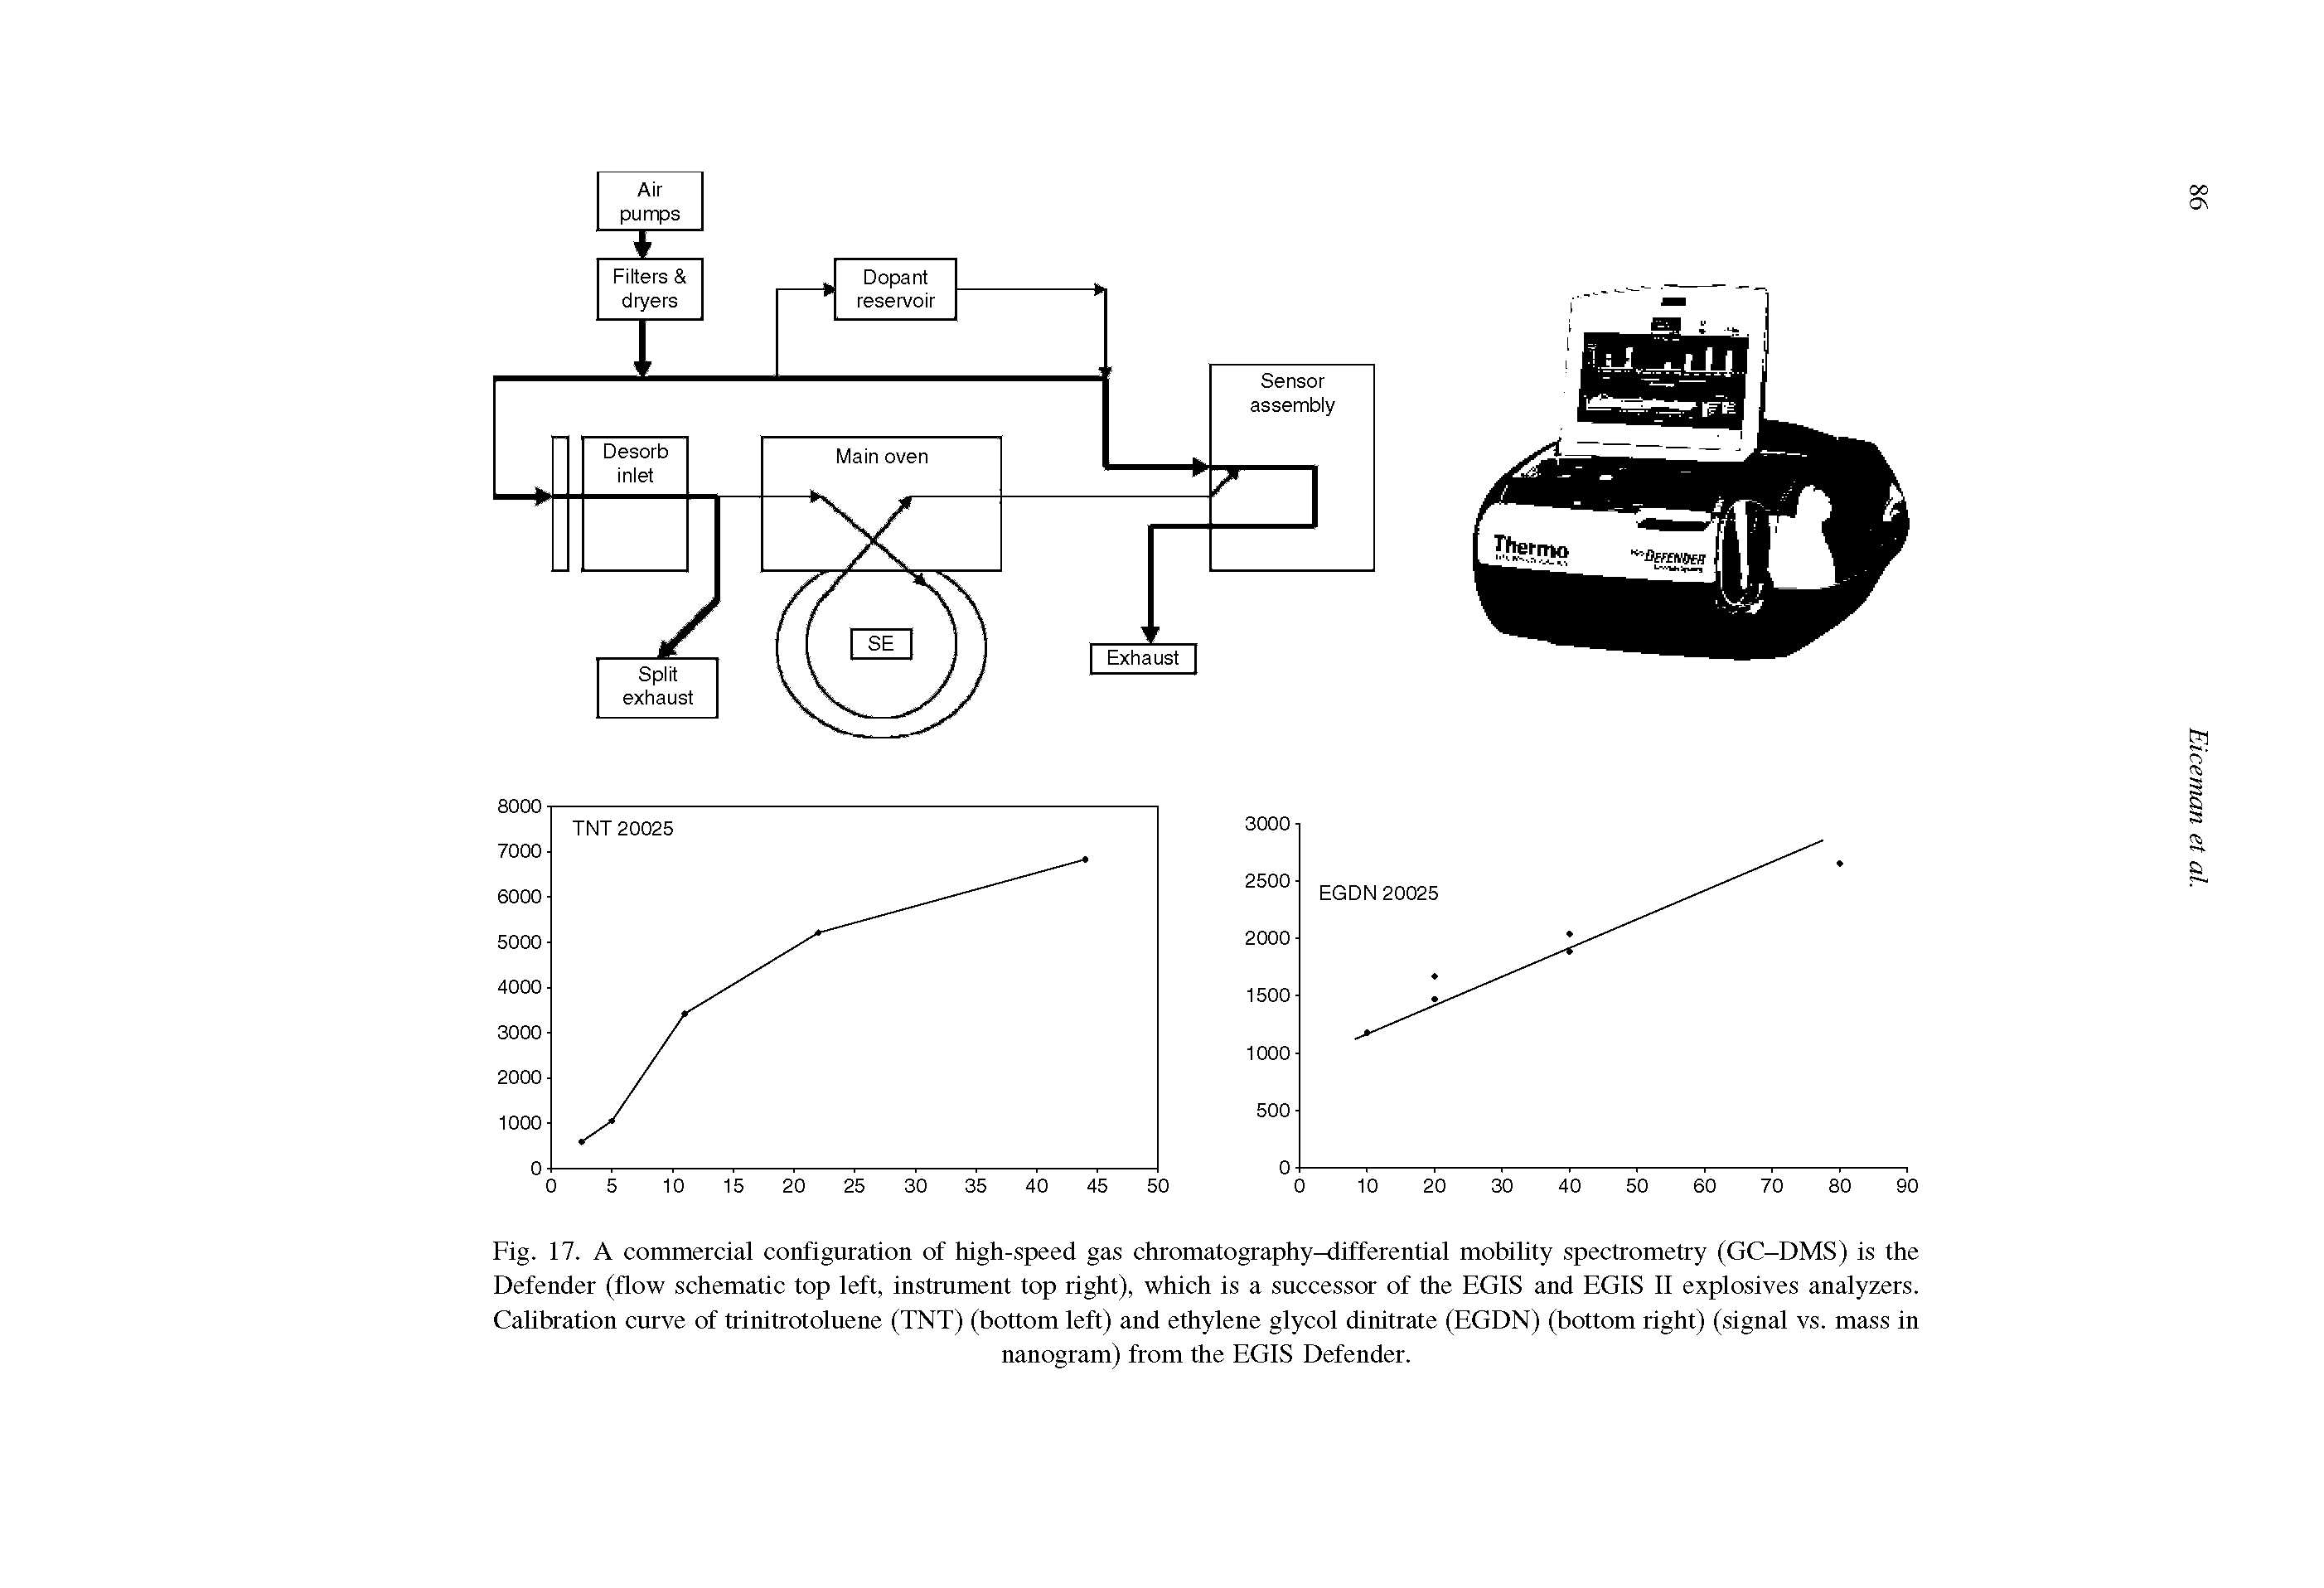 Fig. 17. A commercial configuration of high-speed gas chromatography-differential mobility spectrometry (GC-DMS) is the Defender (flow schematic top left, instrument top right), which is a successor of the EGIS and EGIS II explosives analyzers. Calibration curve of trinitrotoluene (TNT) (bottom left) and ethylene glycol dinitrate (EGDN) (bottom right) (signal vs. mass in...